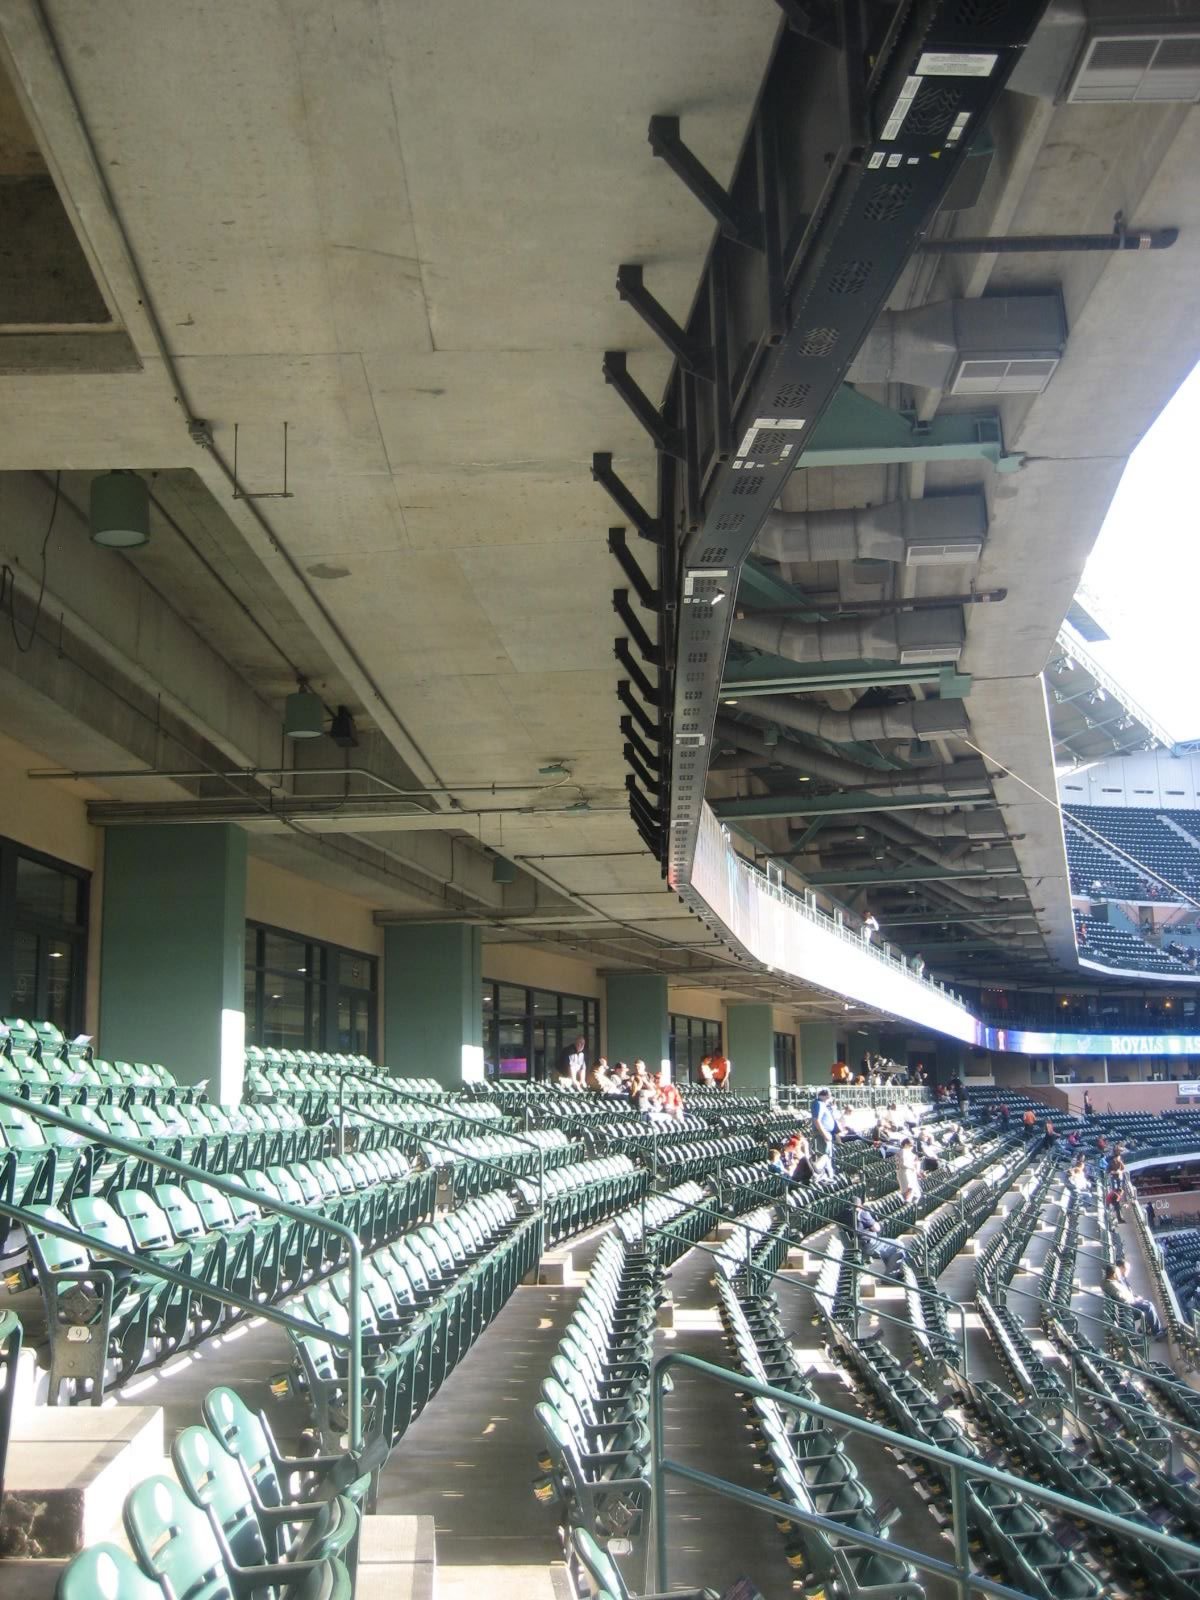 Shaded Seats at Minute Maid Park - Astros Tickets in the Shade